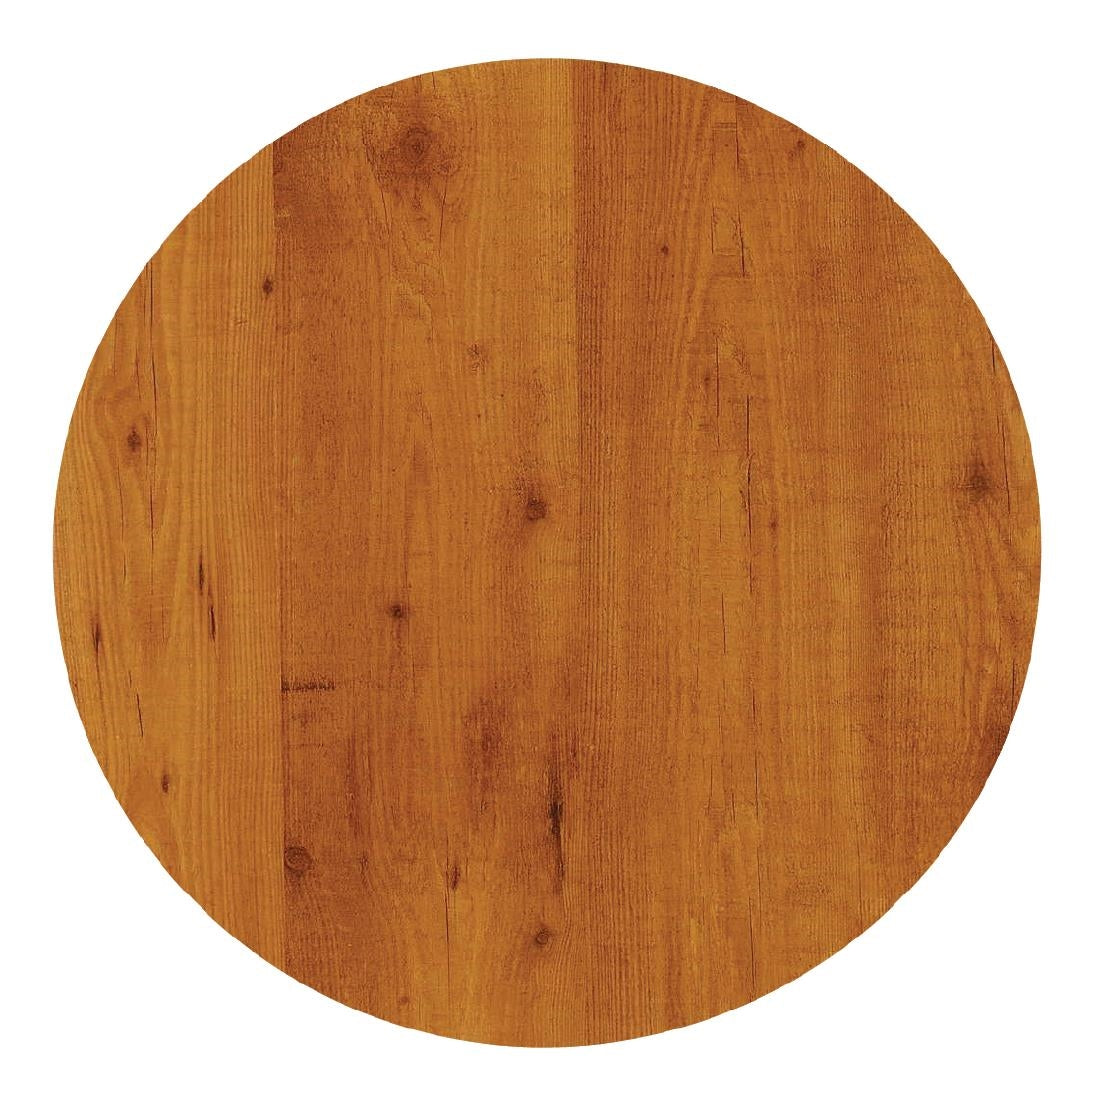 GR575 Werzalit Pre-drilled Round Table Top  Pine 700mm JD Catering Equipment Solutions Ltd